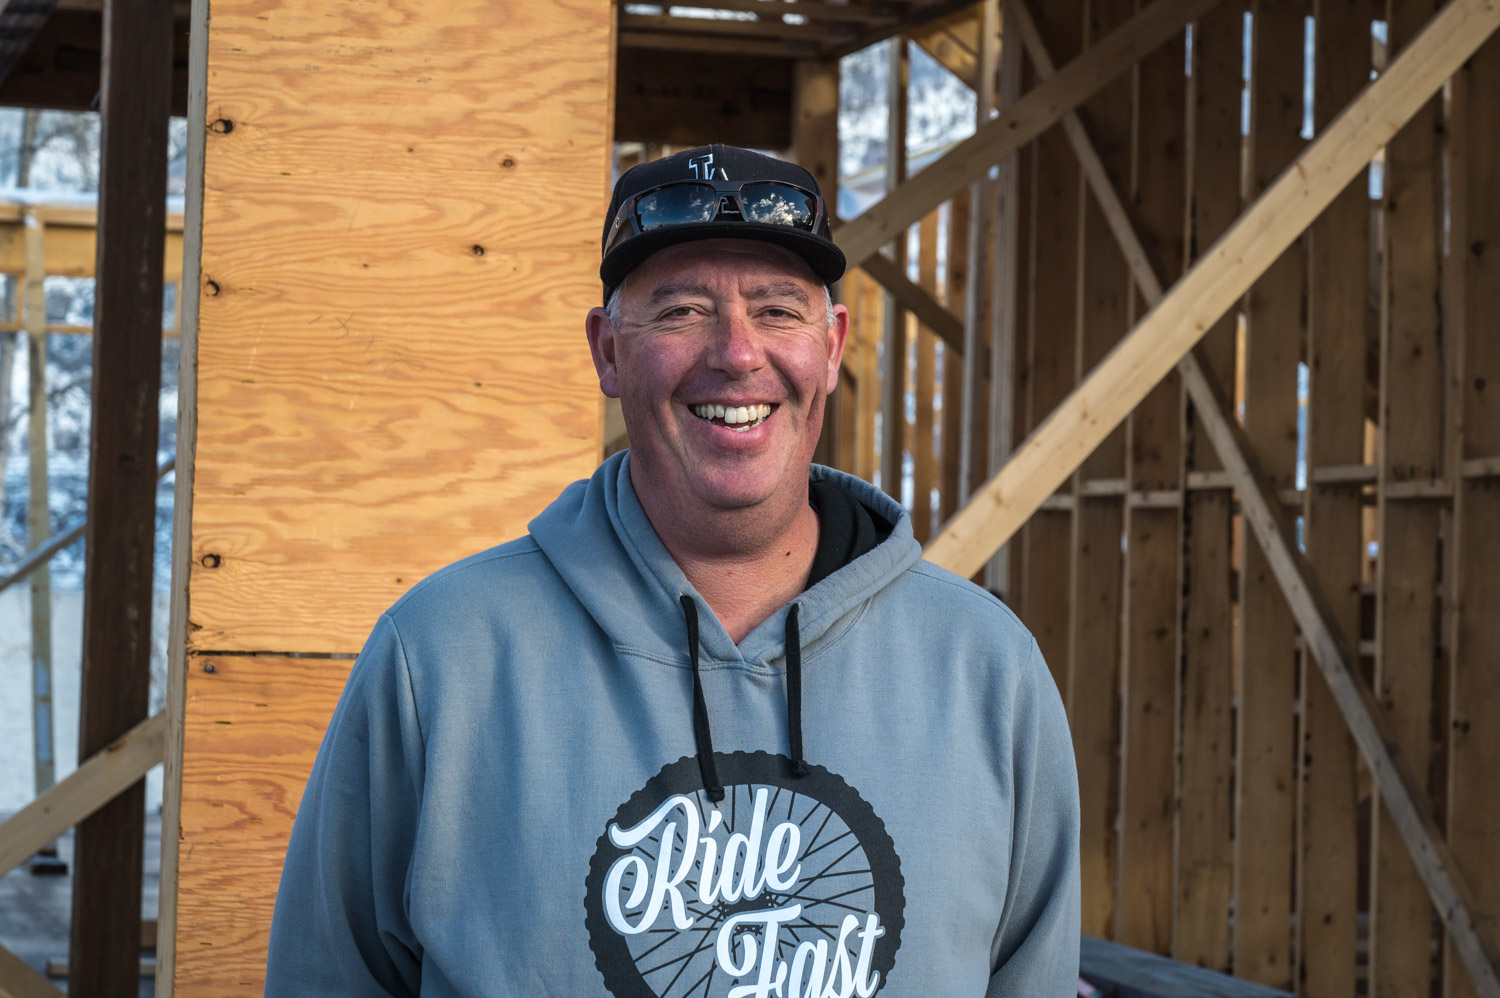 Home builder Len McLean also does his part to build the community